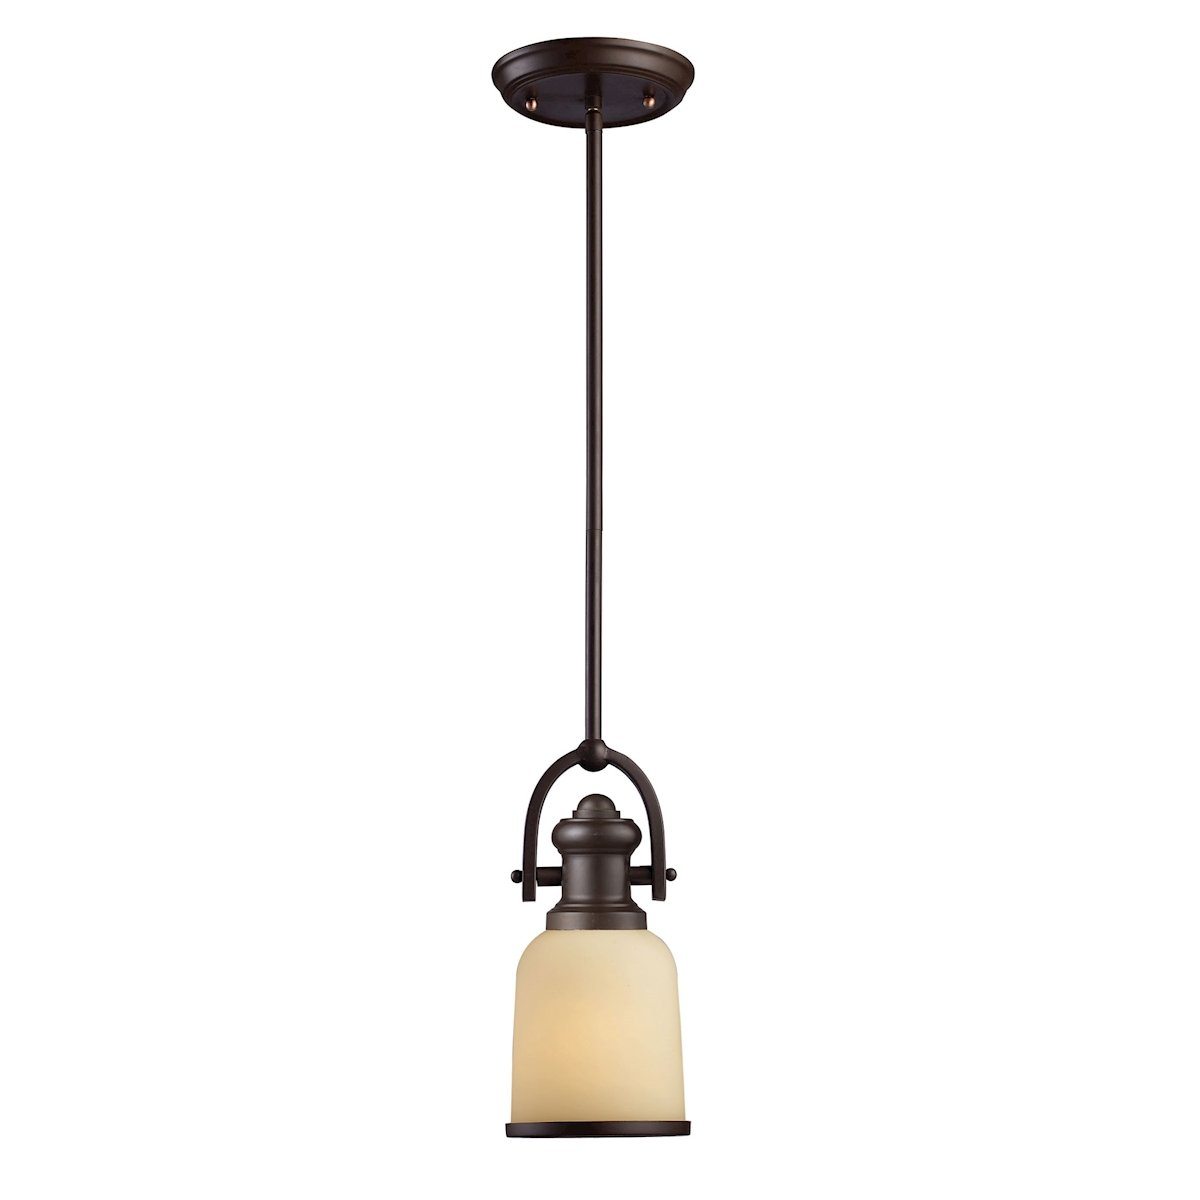 Brooksdale Mini Pendant In Oiled Bronze And Amber Glass Ceiling Elk Lighting 